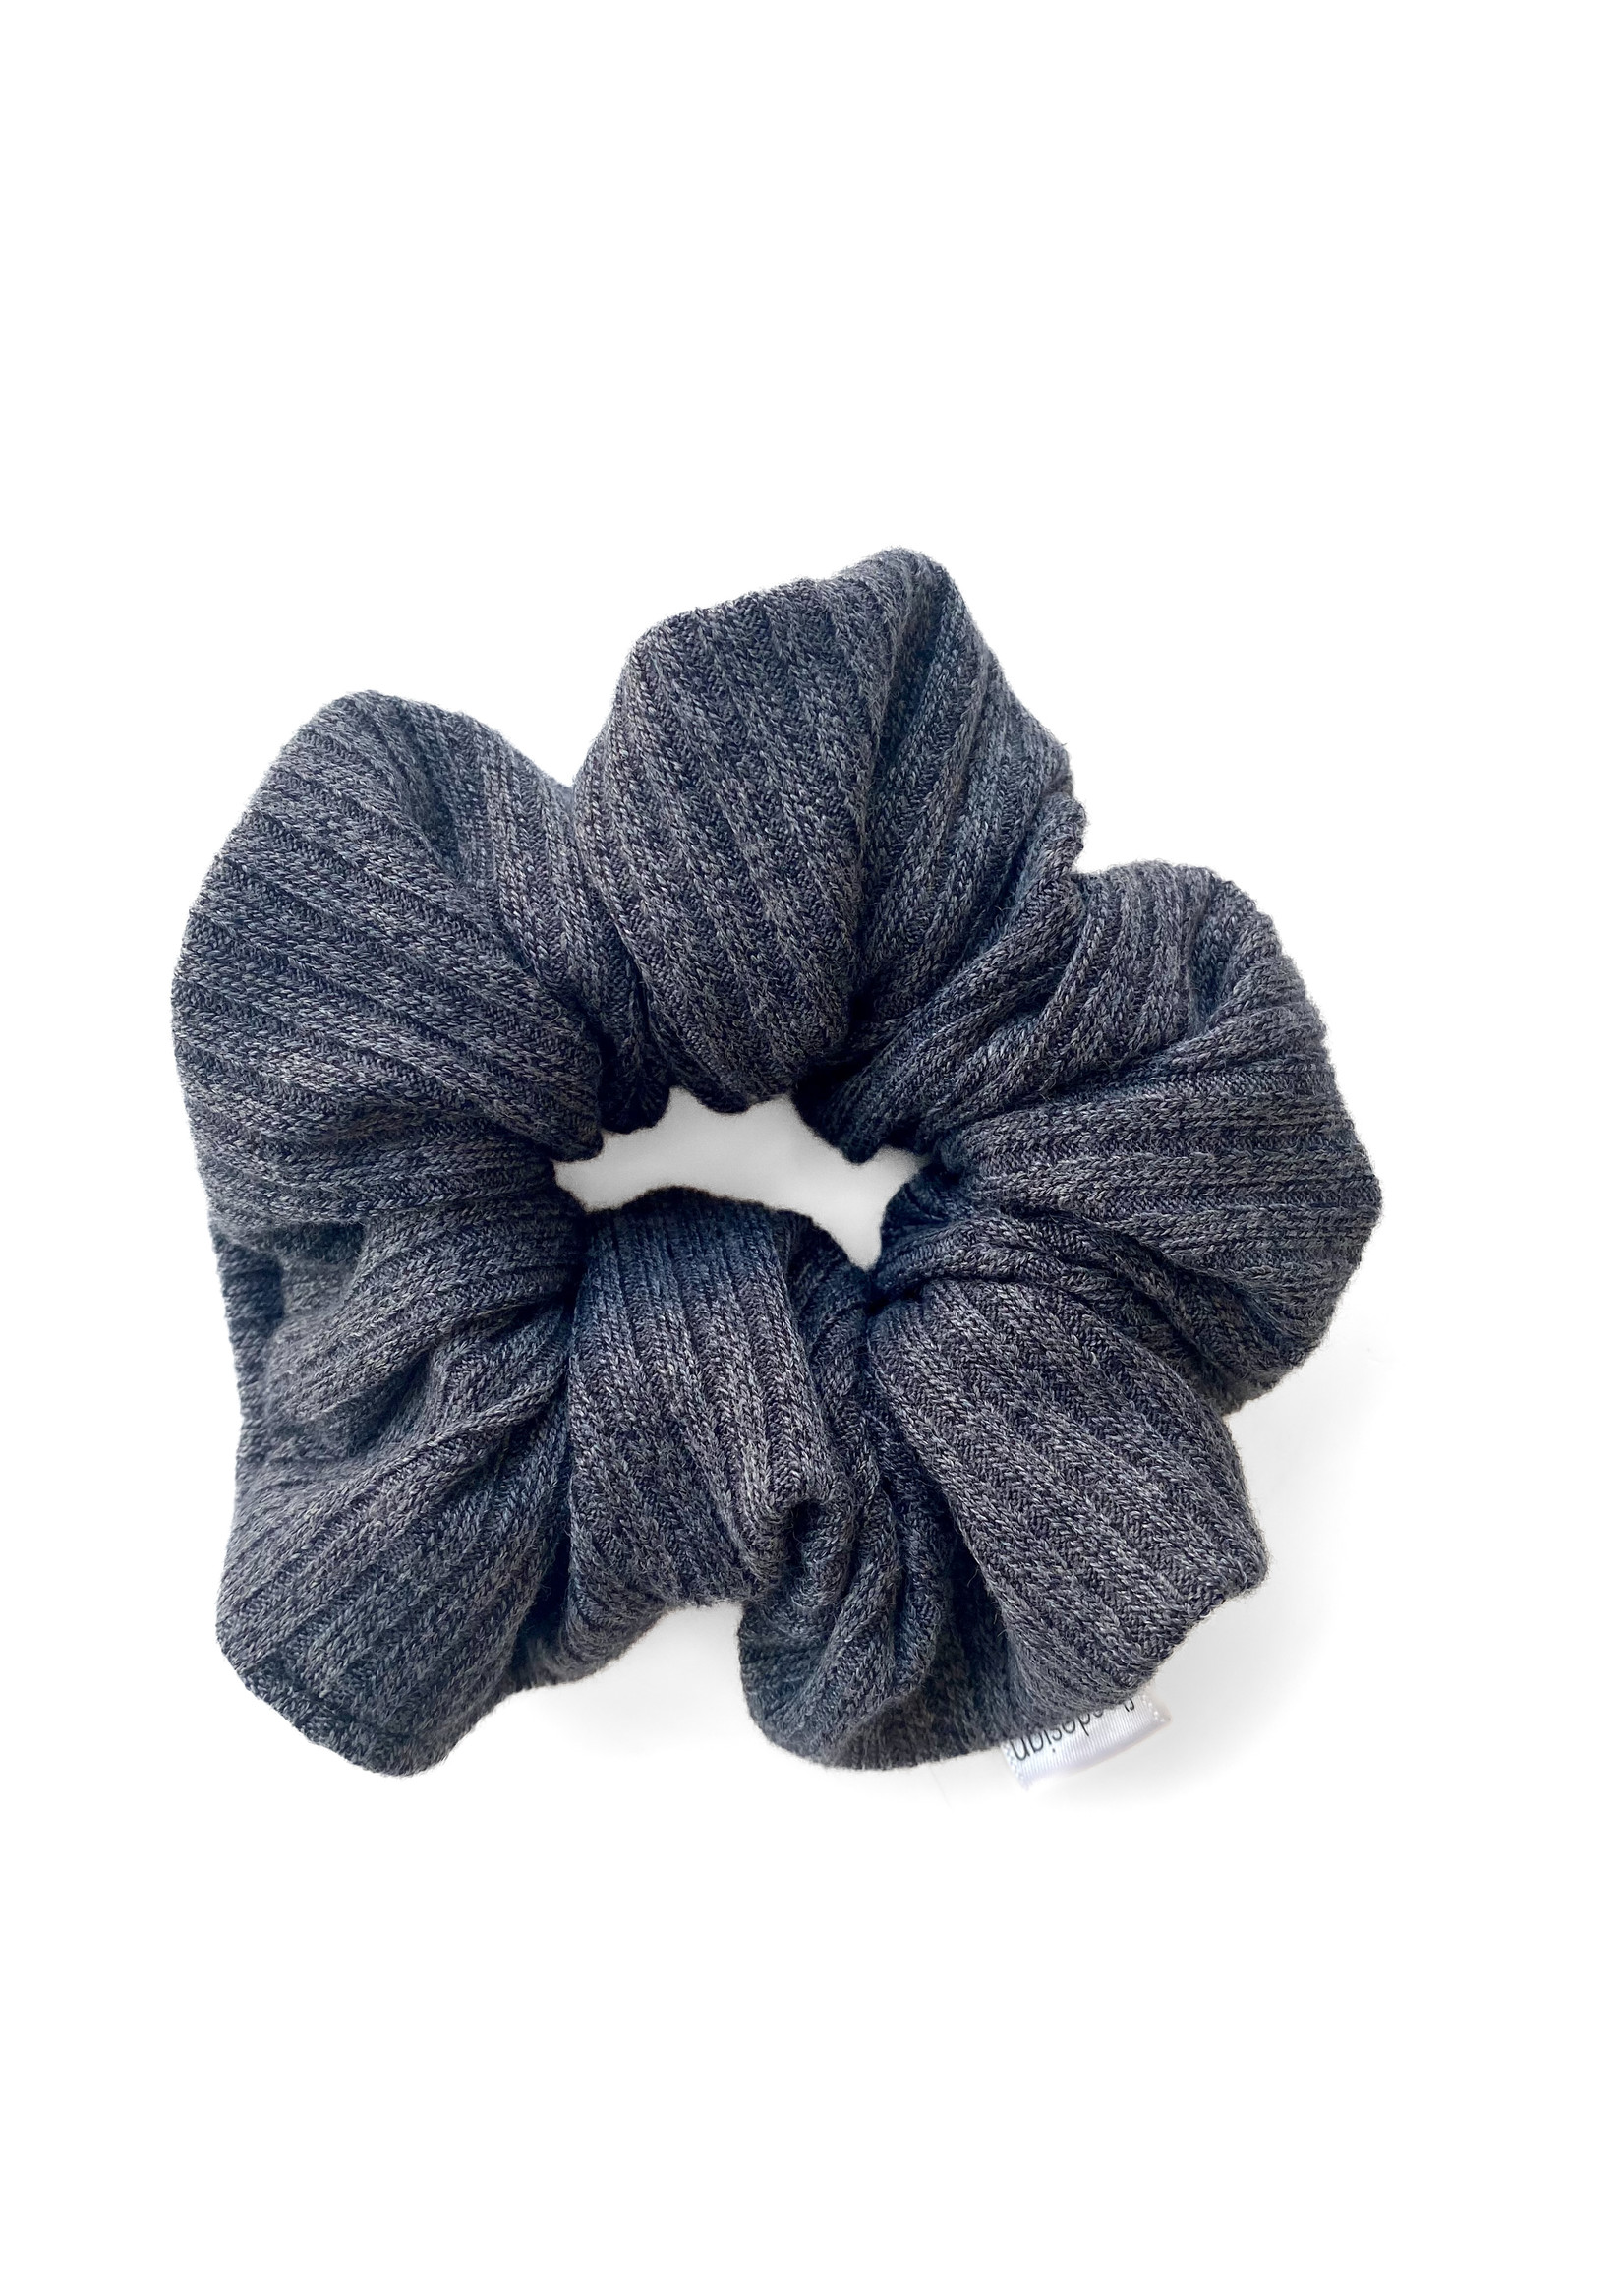 Flosdesign Ribbed Sweater Scrunchie - Charcoal